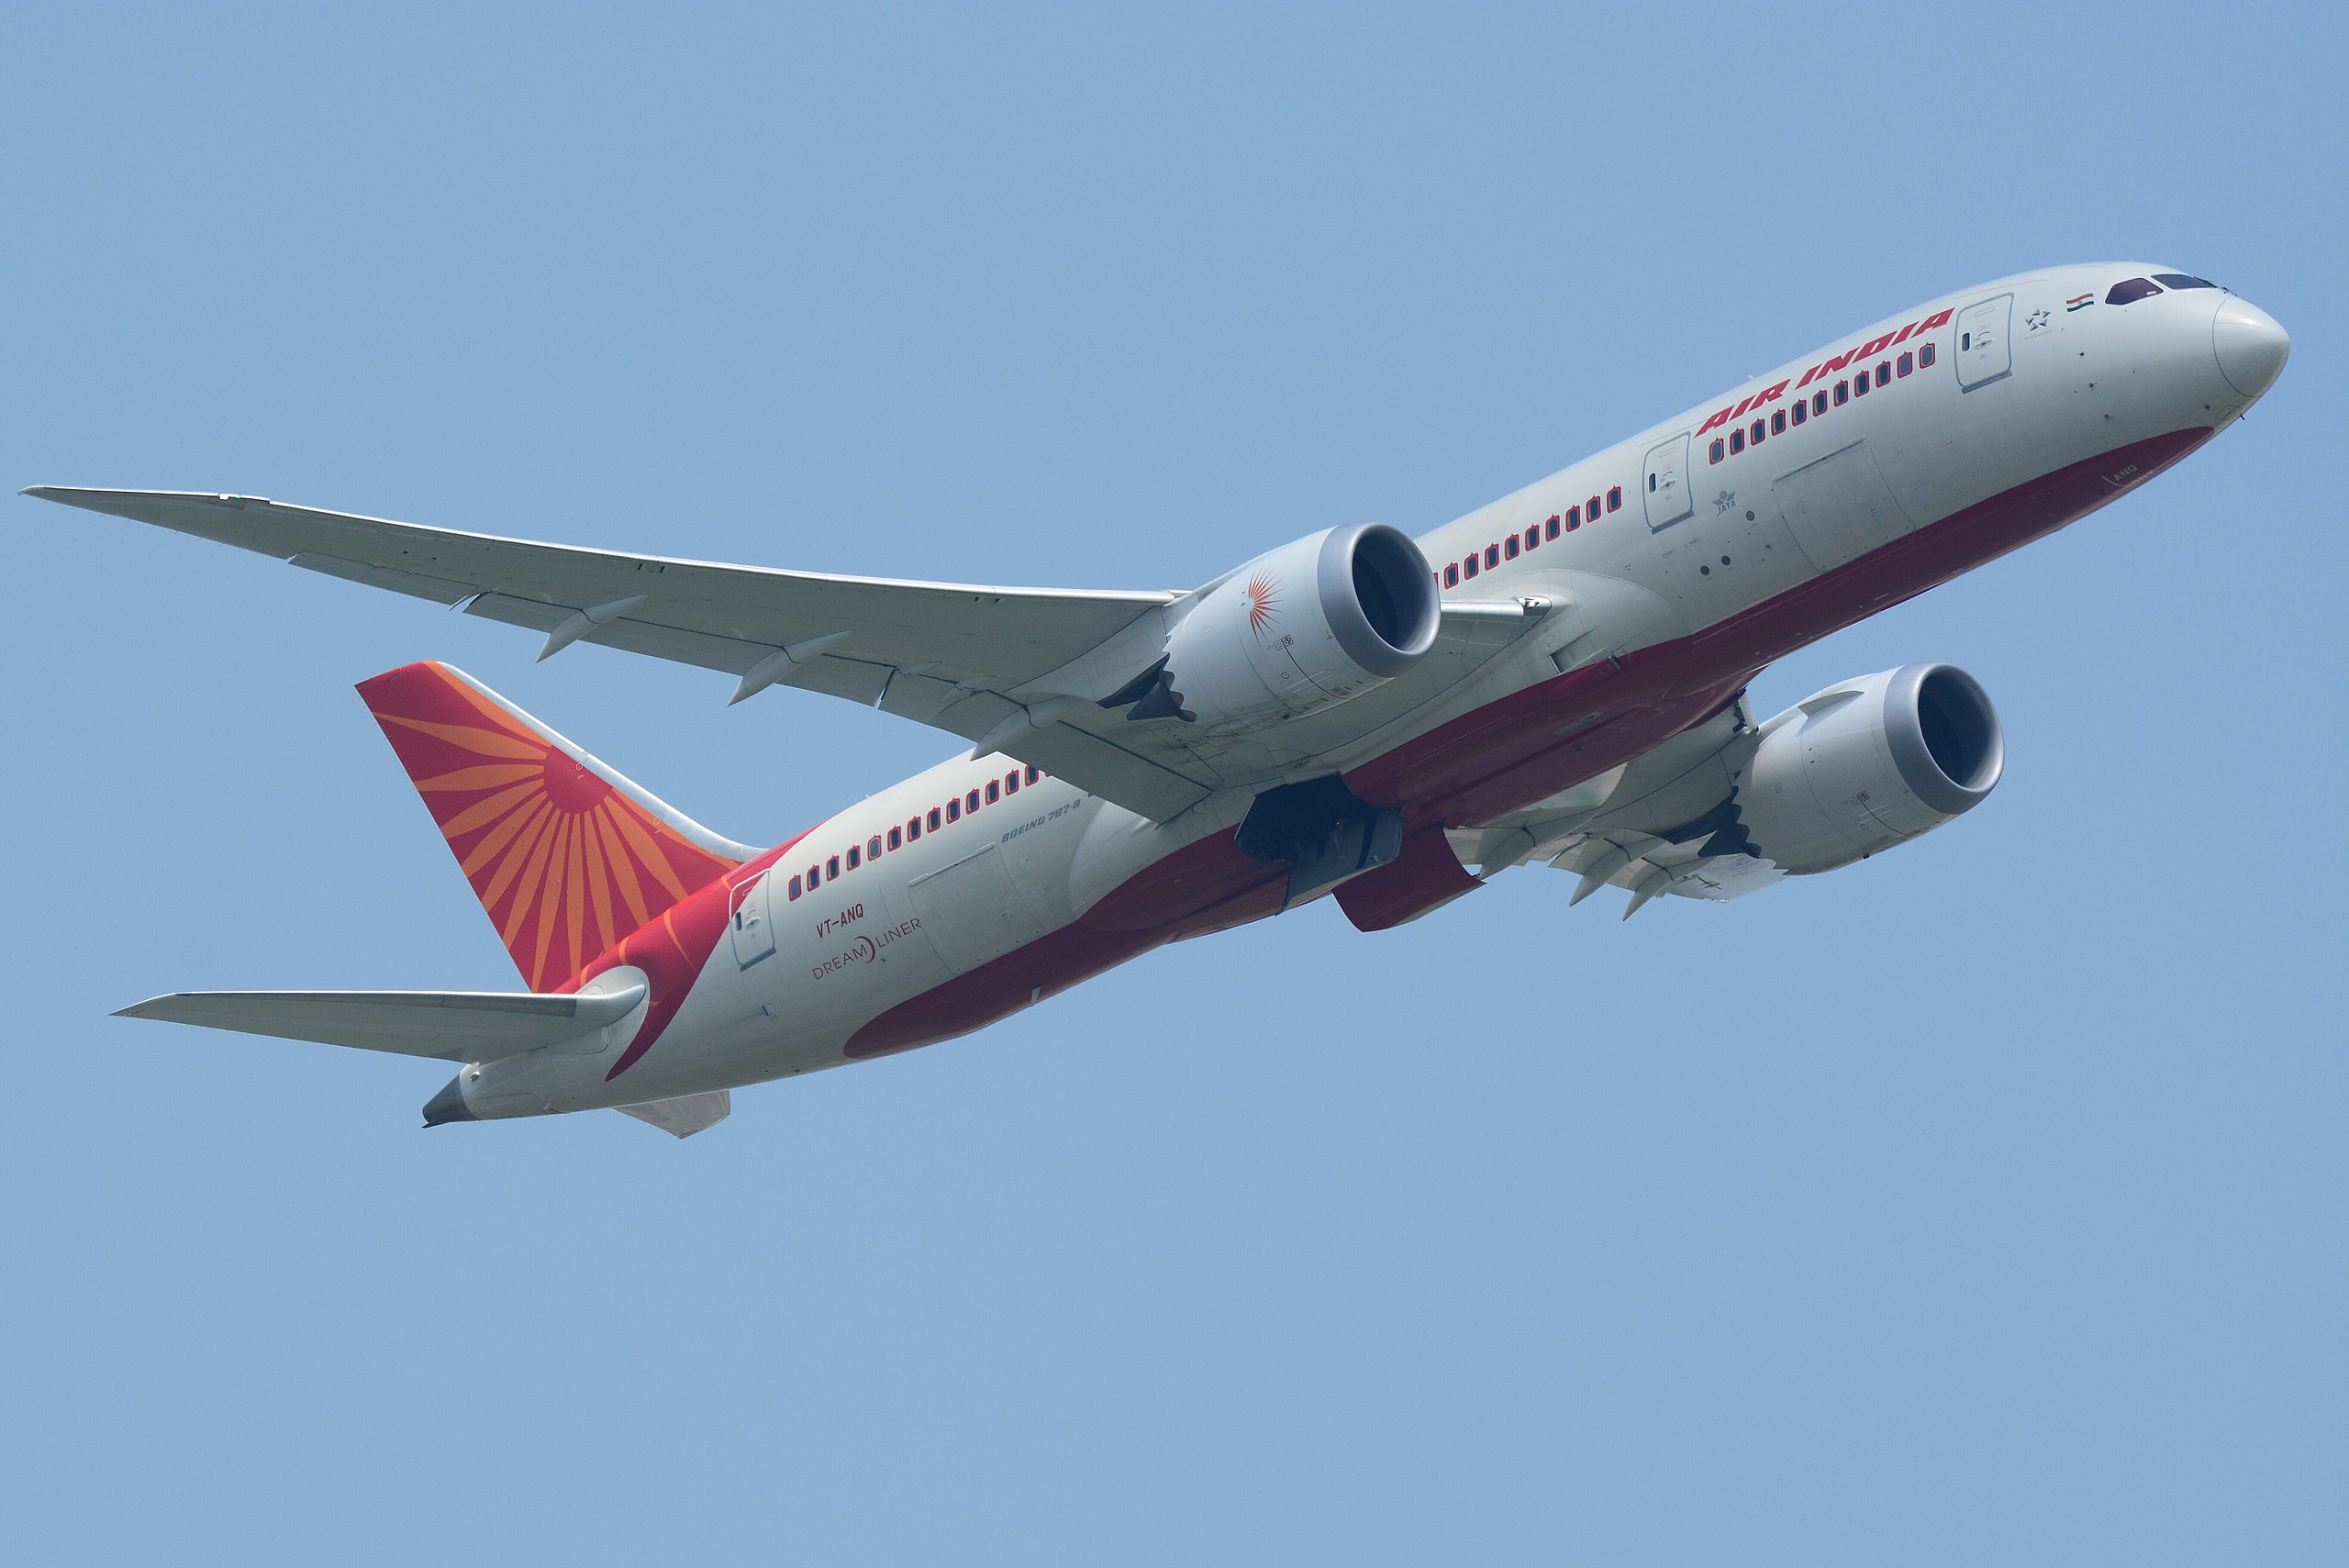 An Air India Boeing Dreamliner climbs out after takeoff.